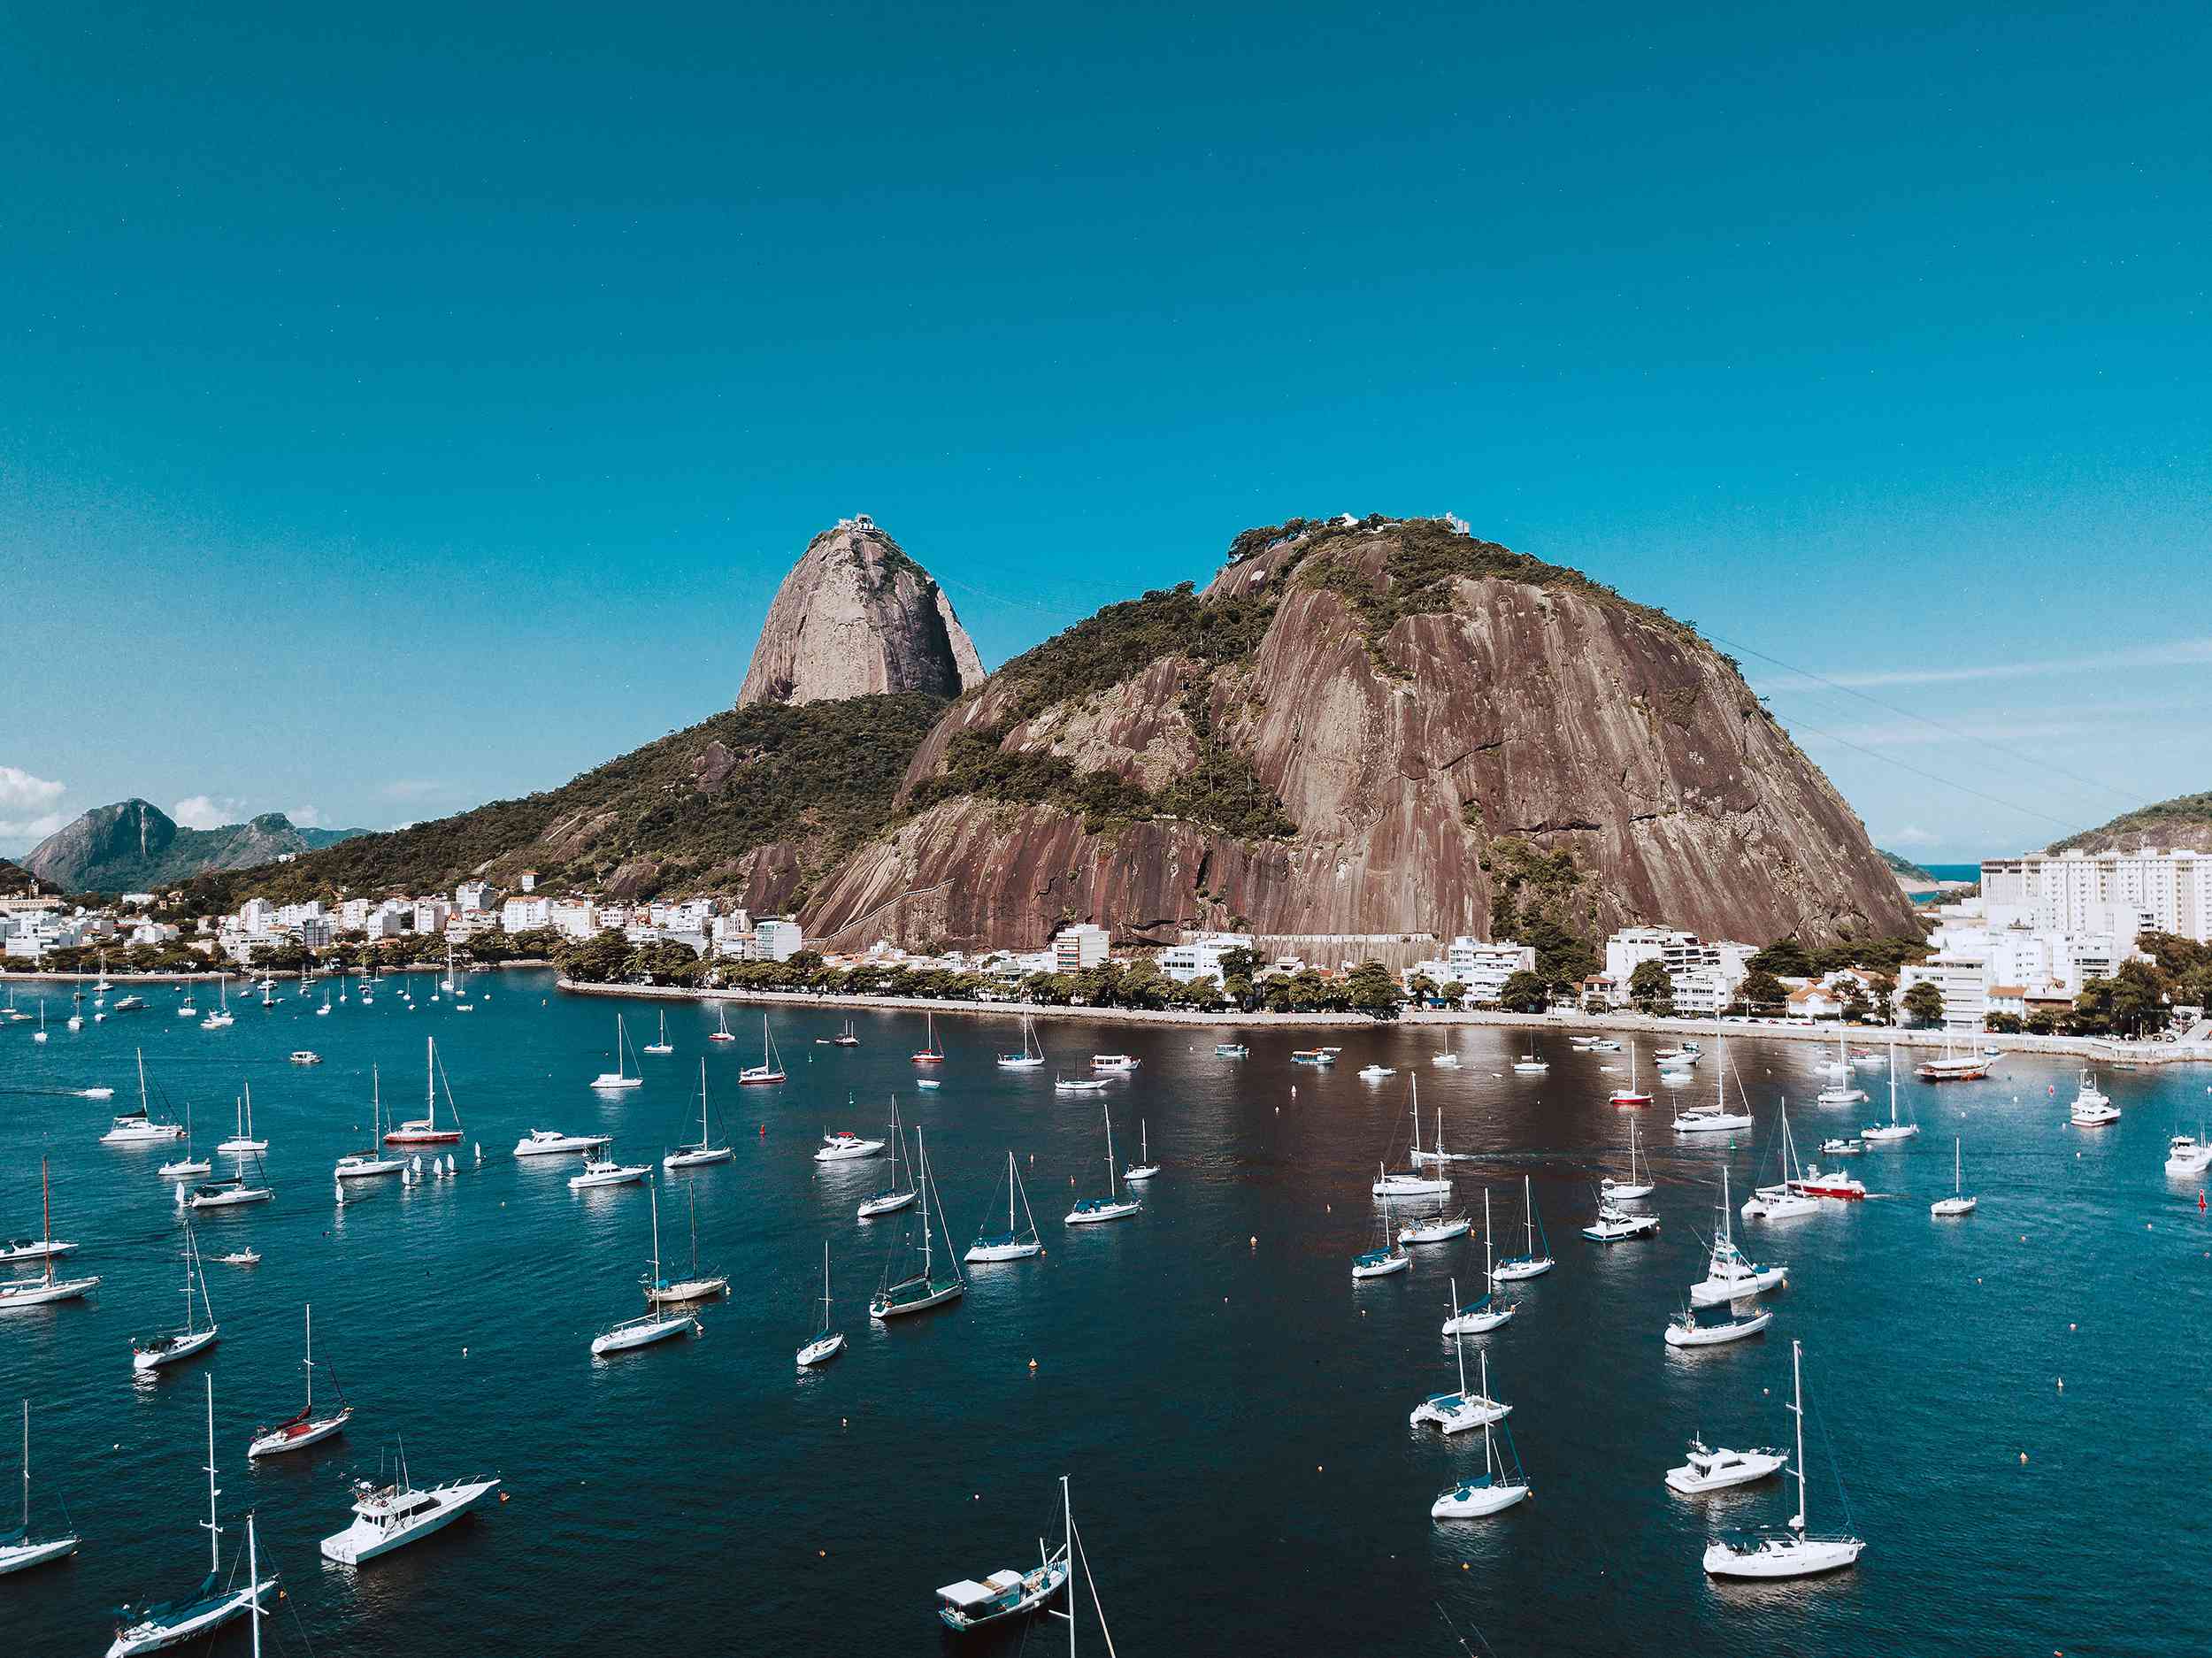 Is Rio de Janeiro Tap Water Safe To Drink? Tap water & safety quality